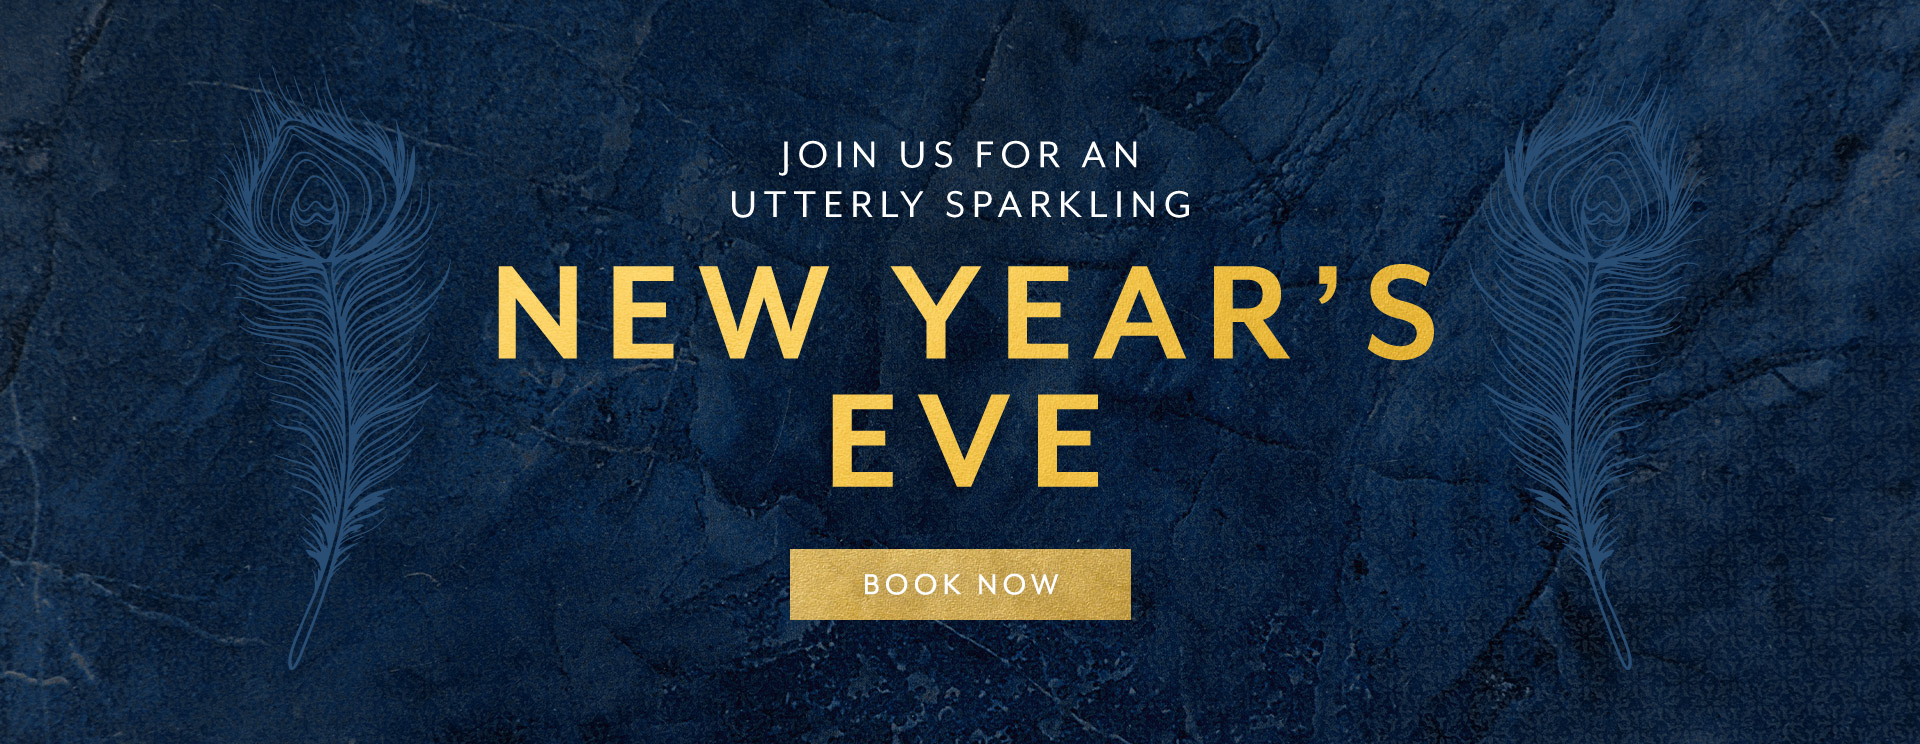 New Year's Eve at The Rose & Crown